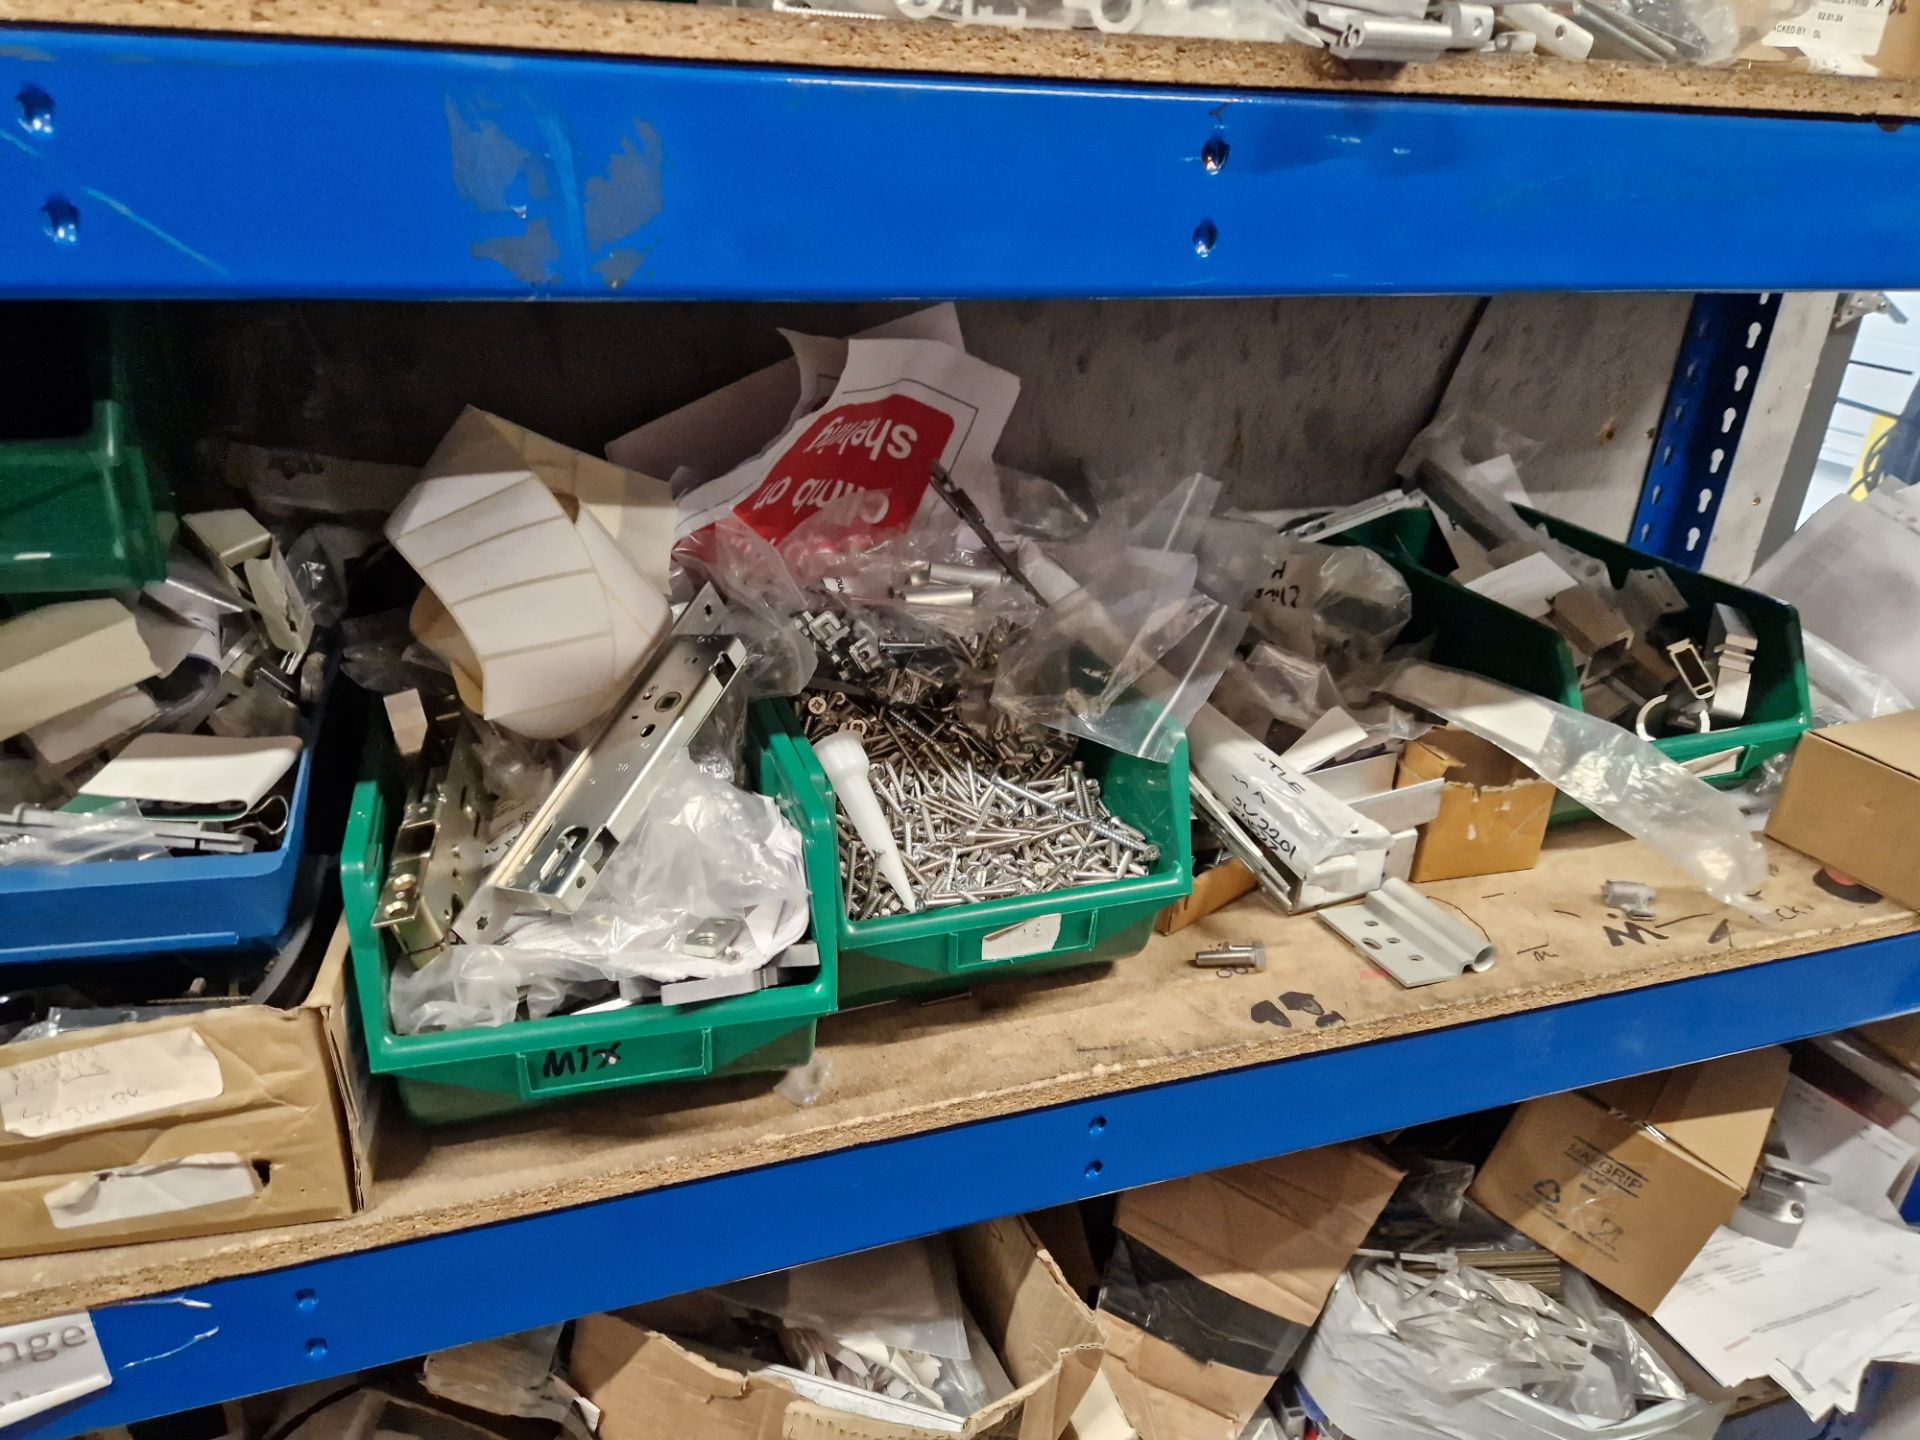 Contents to Two Bays of Shelving, including Rubber Gaskets, Aluminium Profile, End Caps, Screws, - Image 9 of 11